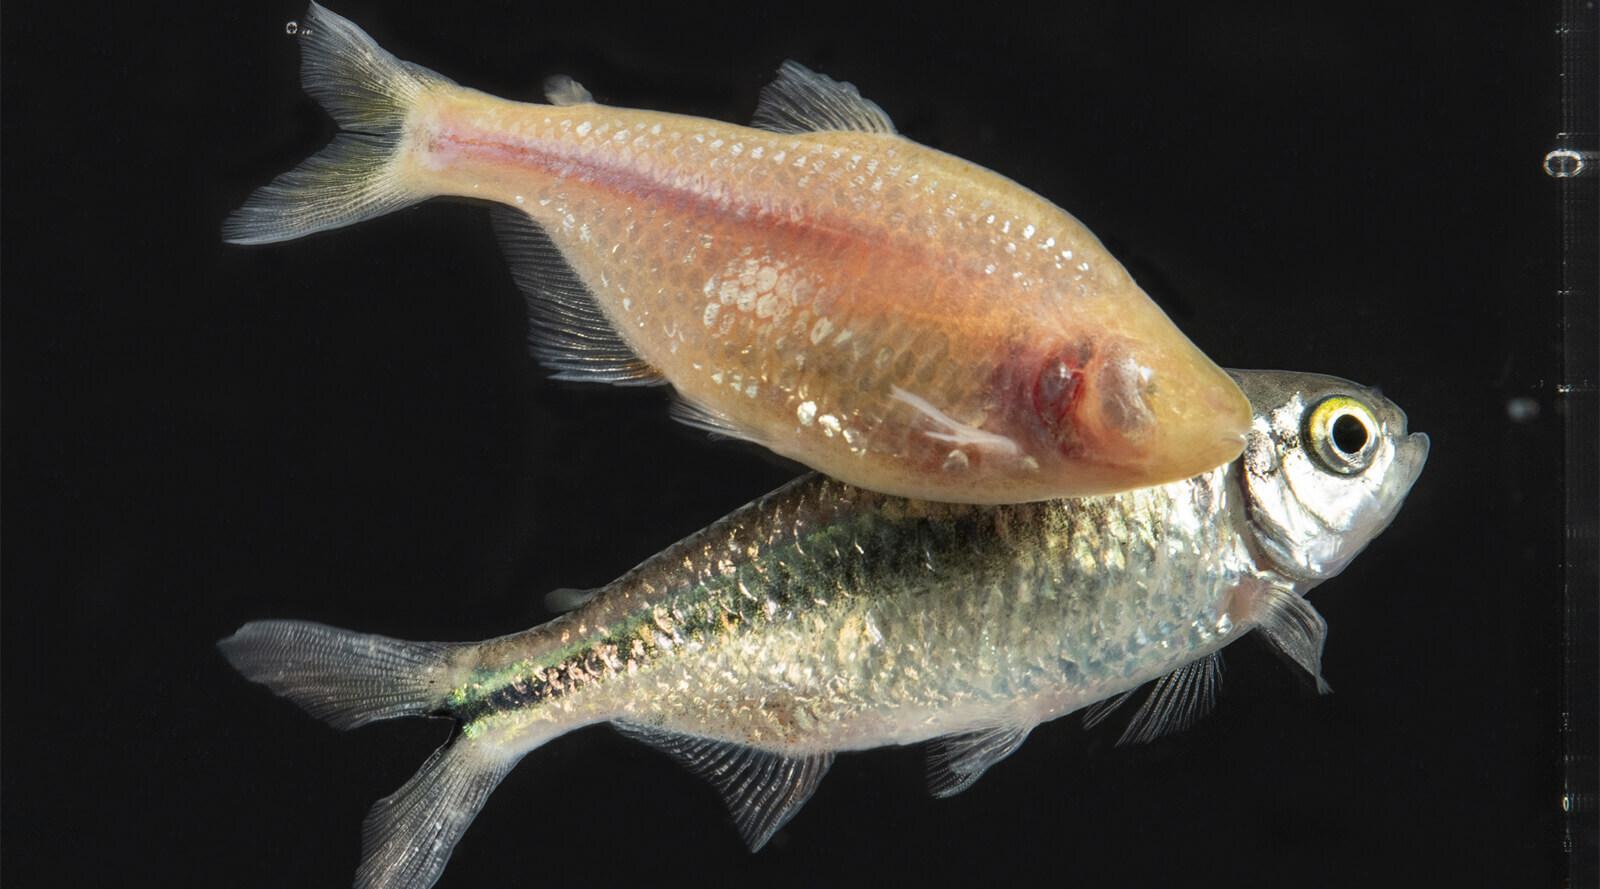 Picture of an cavefish lacking pigmentation and eyes above a surface (river) fish which has both eyes and pigmentation. The fish are used to study metabolism, diabetes, and metabolic disease in the lab of Nicolas Rohner.